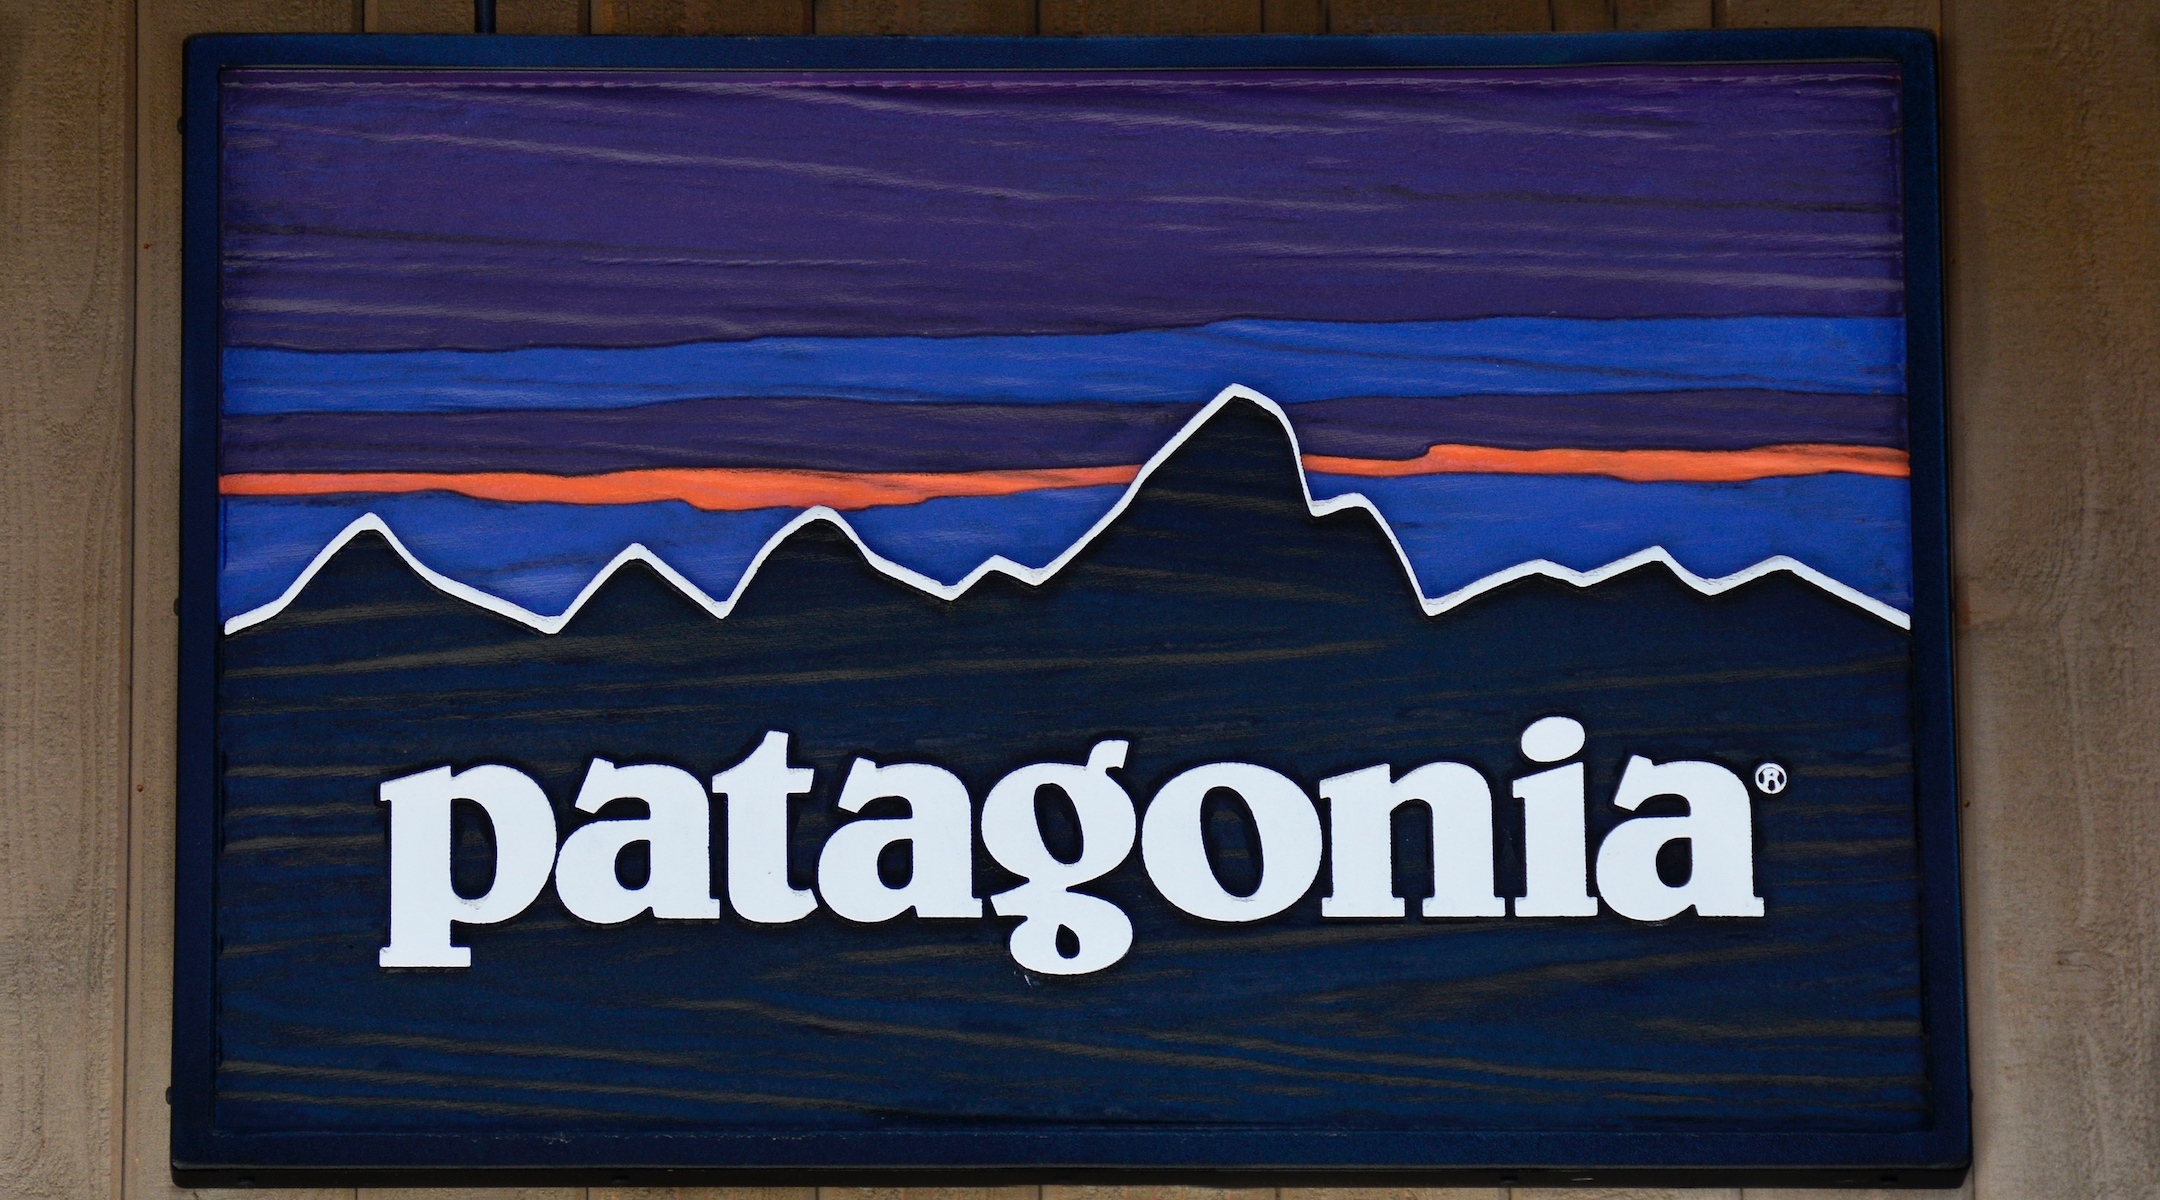 Patagonia is one of several major companies to sign onto an ADL-led boycott of Facebook ads. (Robert Alexander/Getty Images)